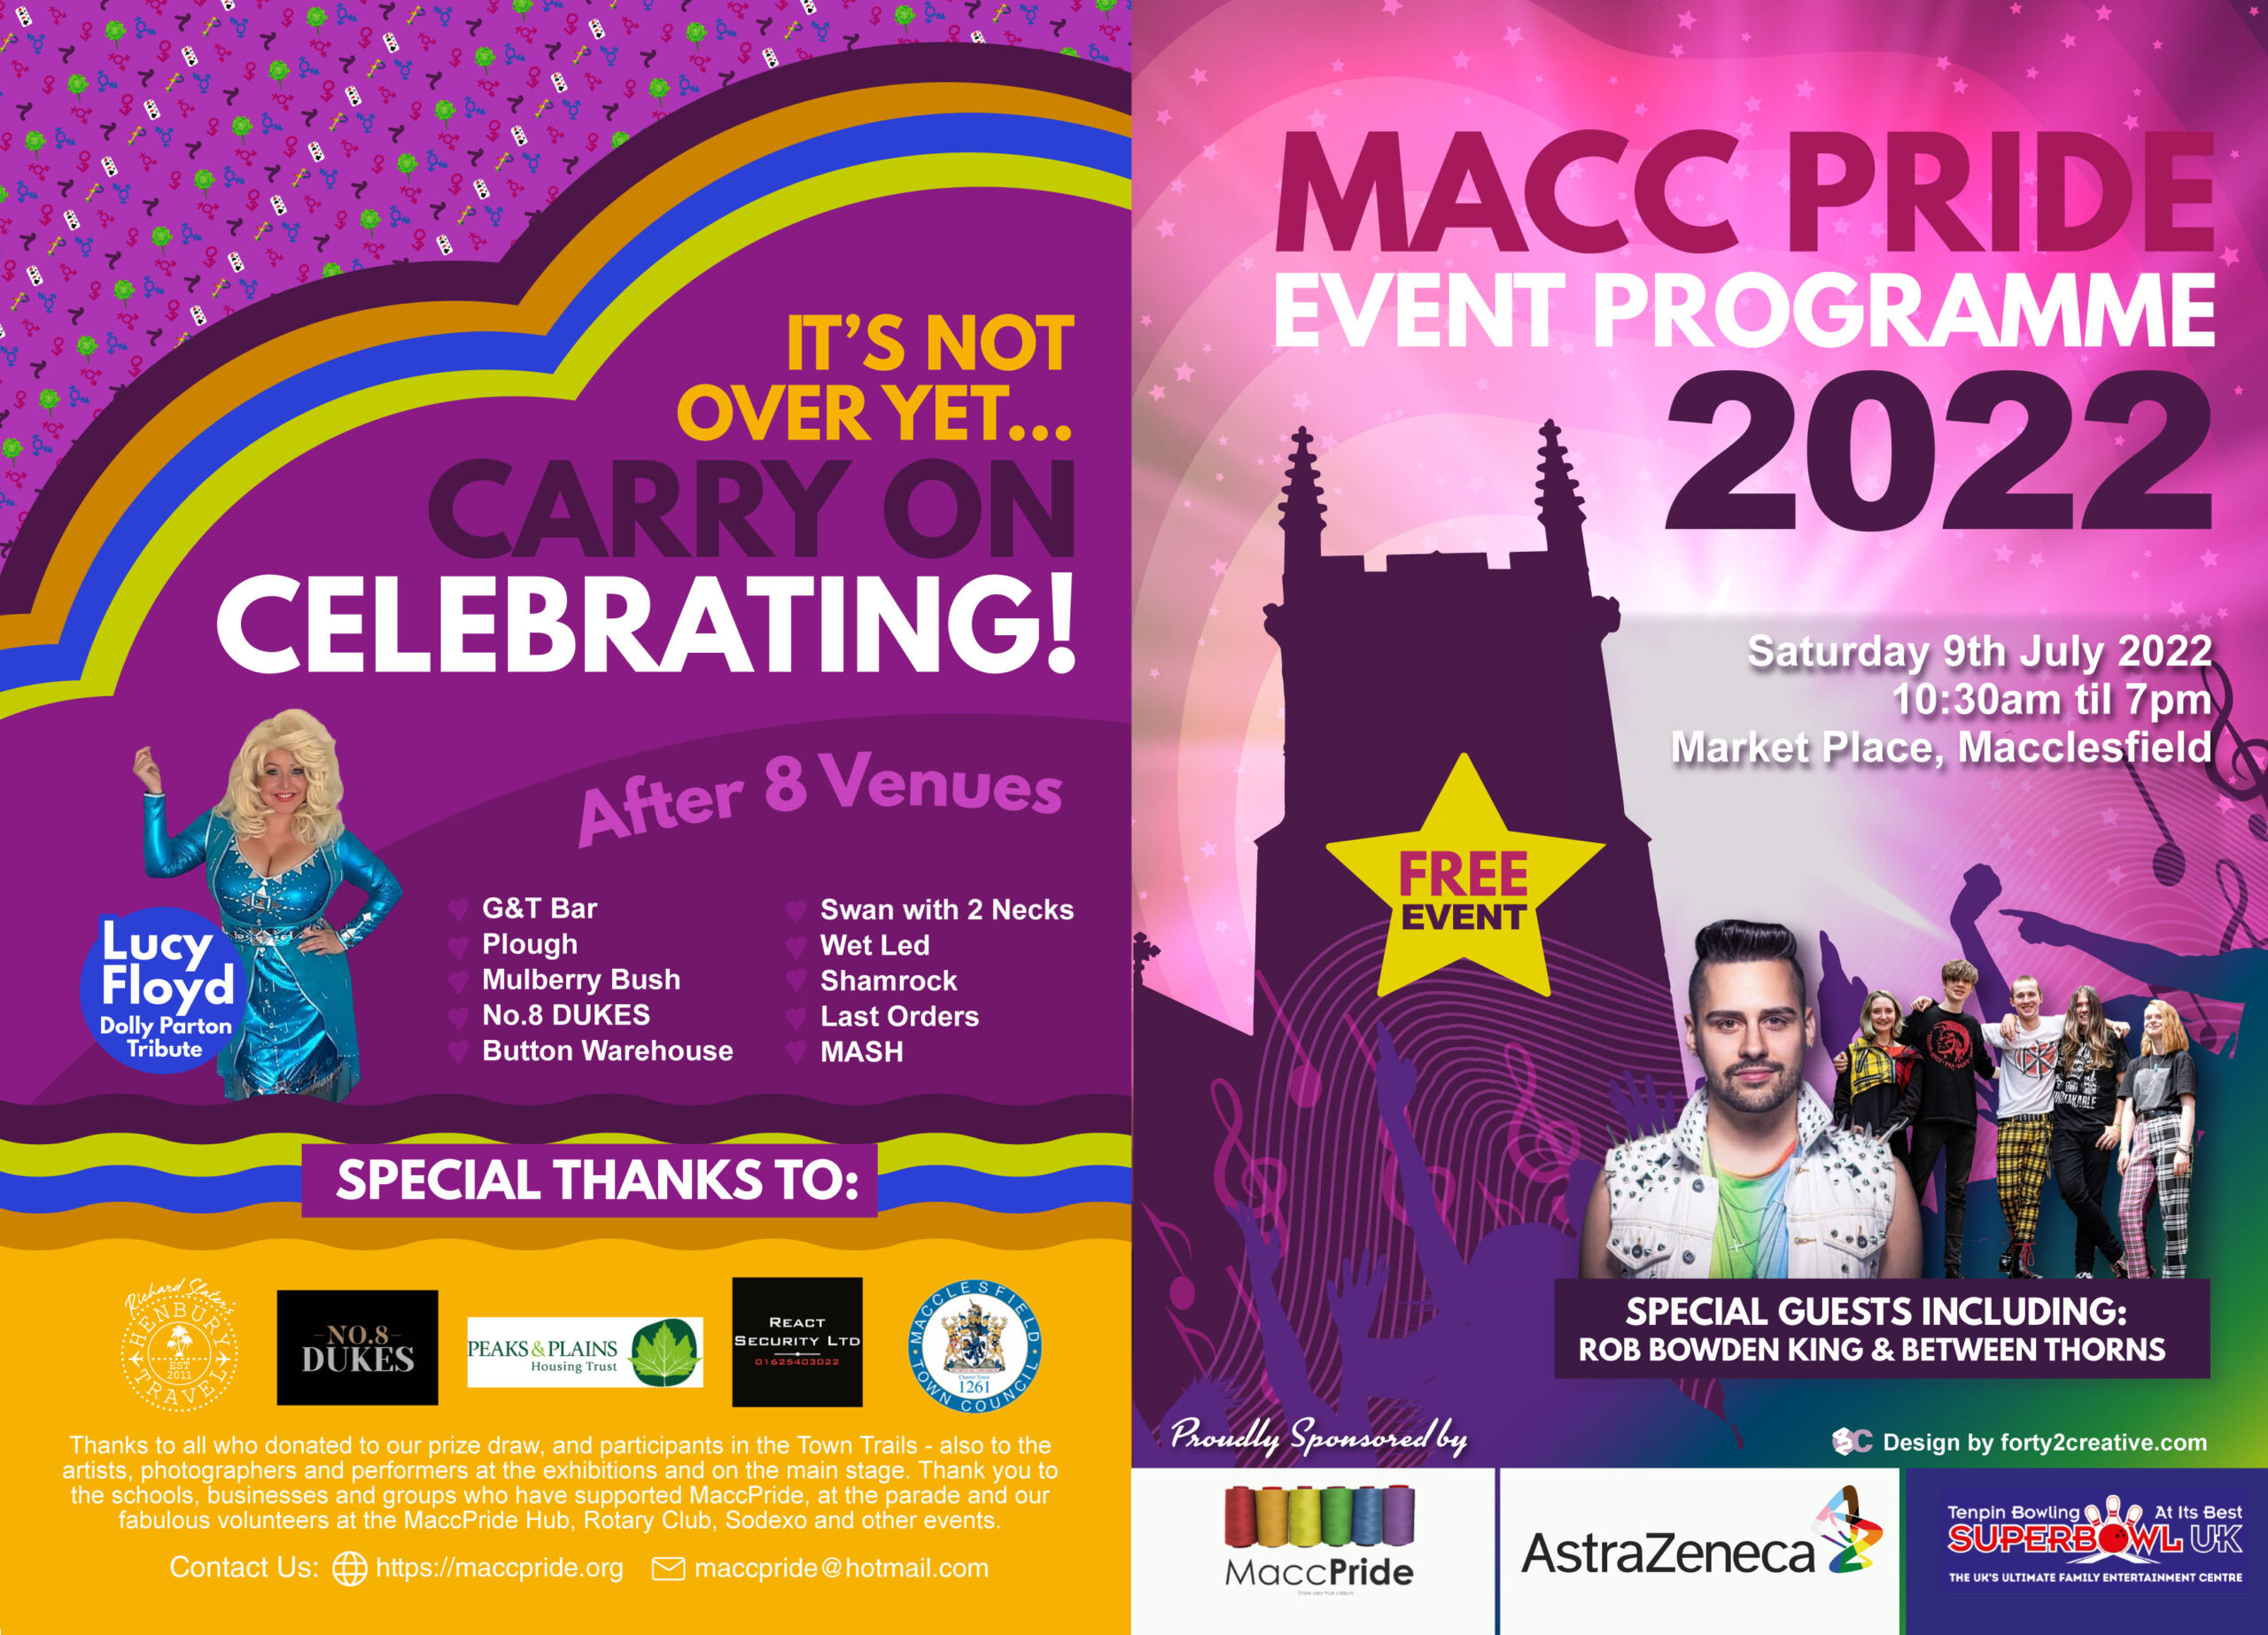 Program of Events for MaccPride 2022